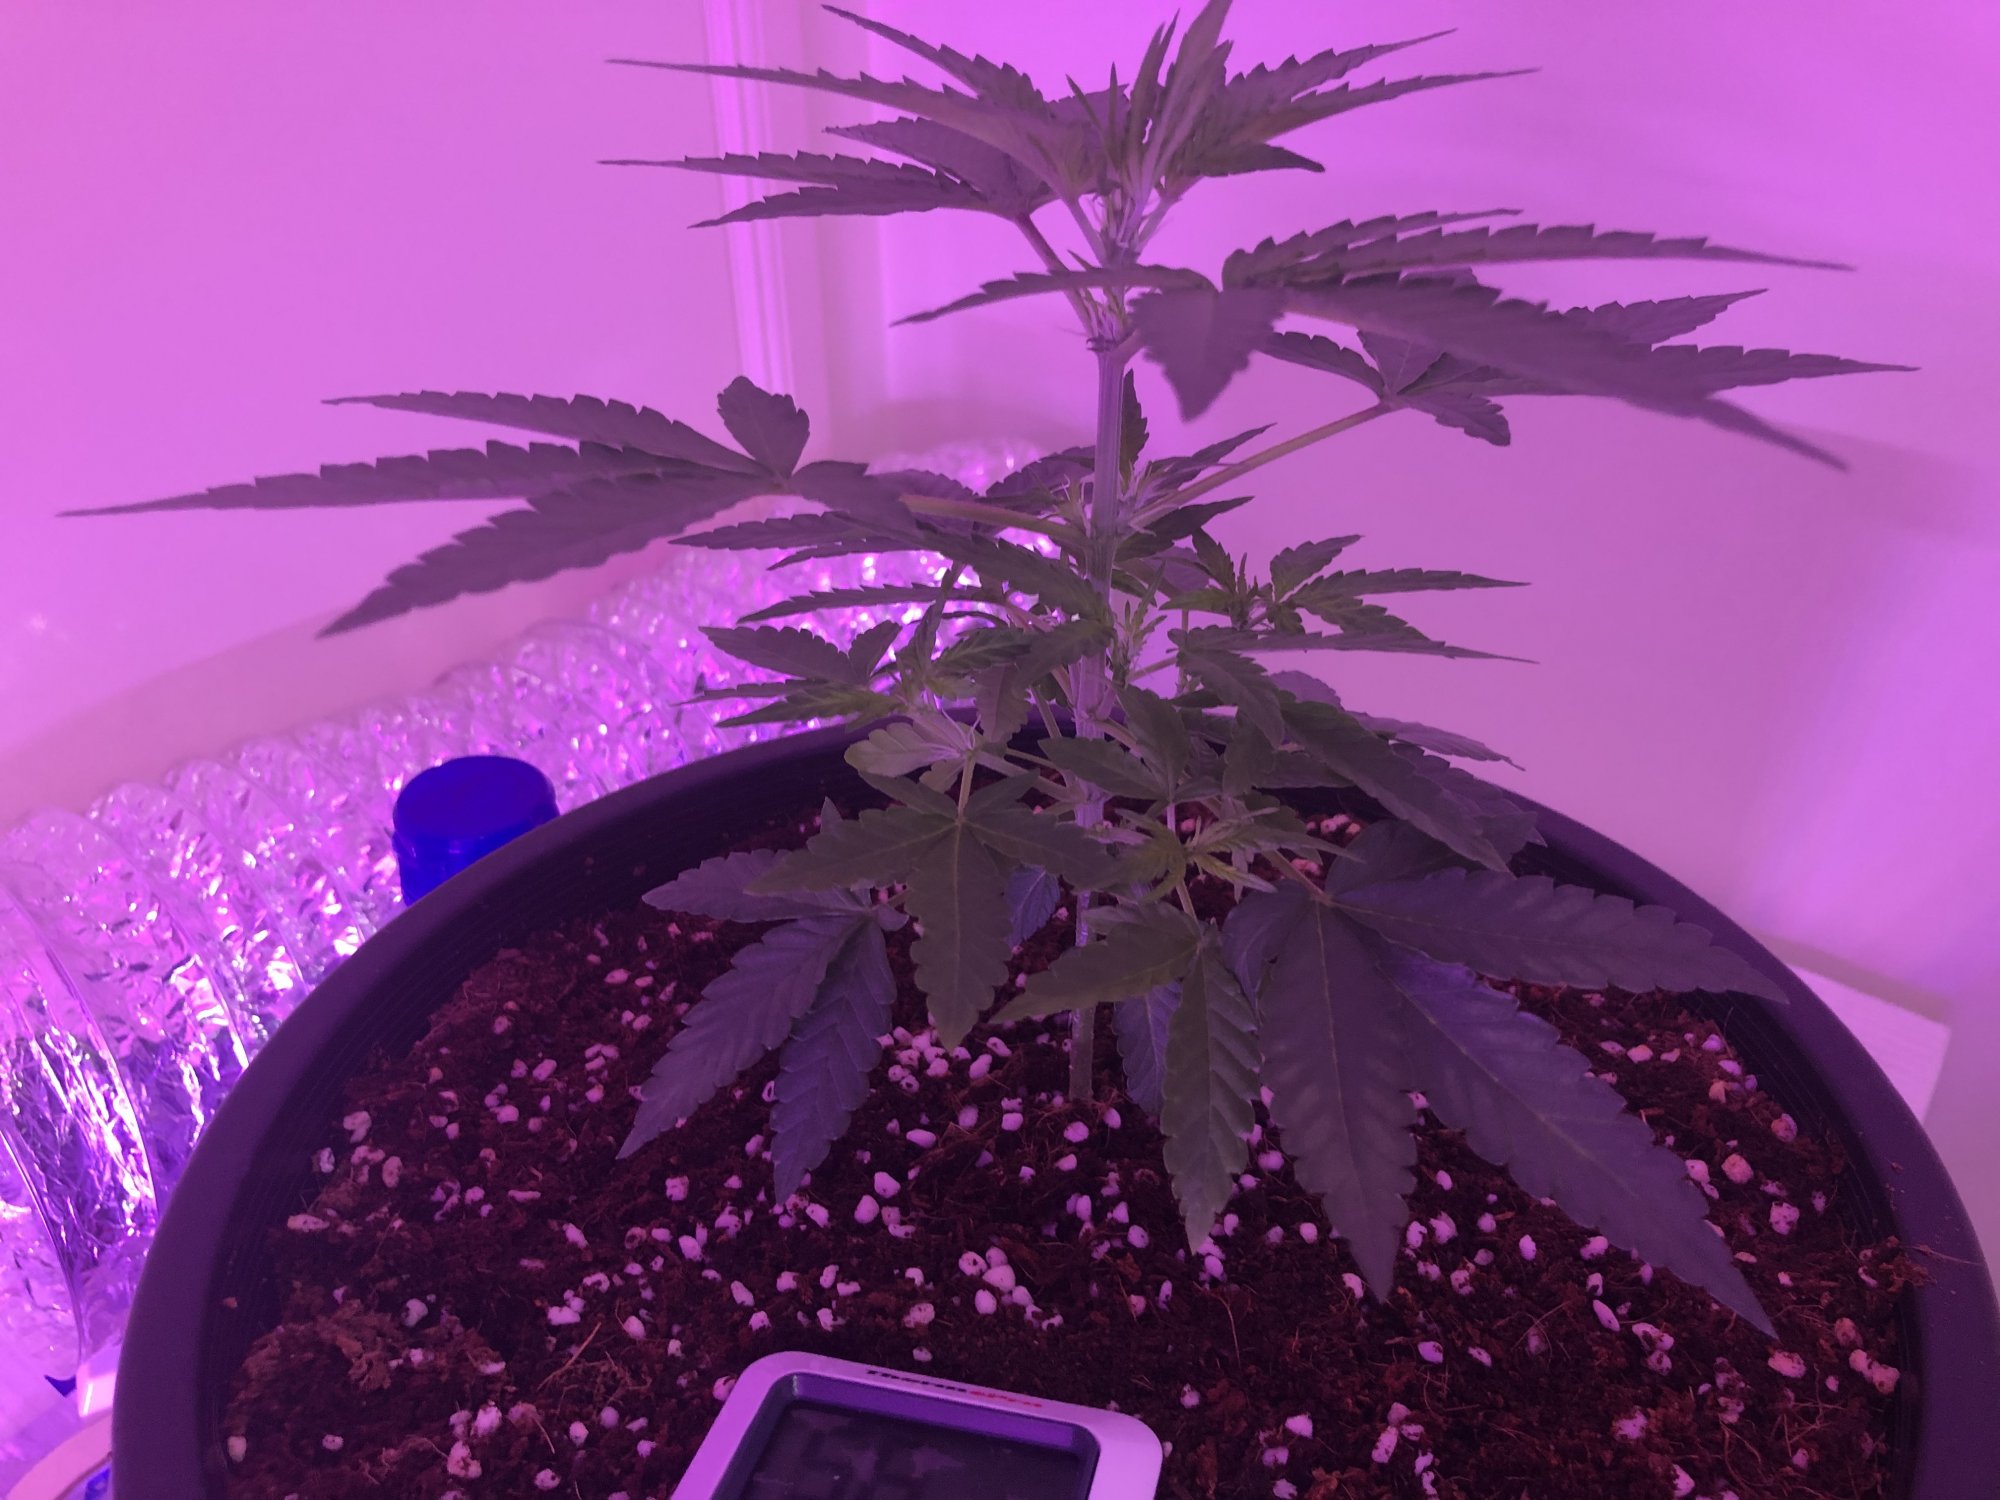 Whats peoples thoughts on my first plant grow 2